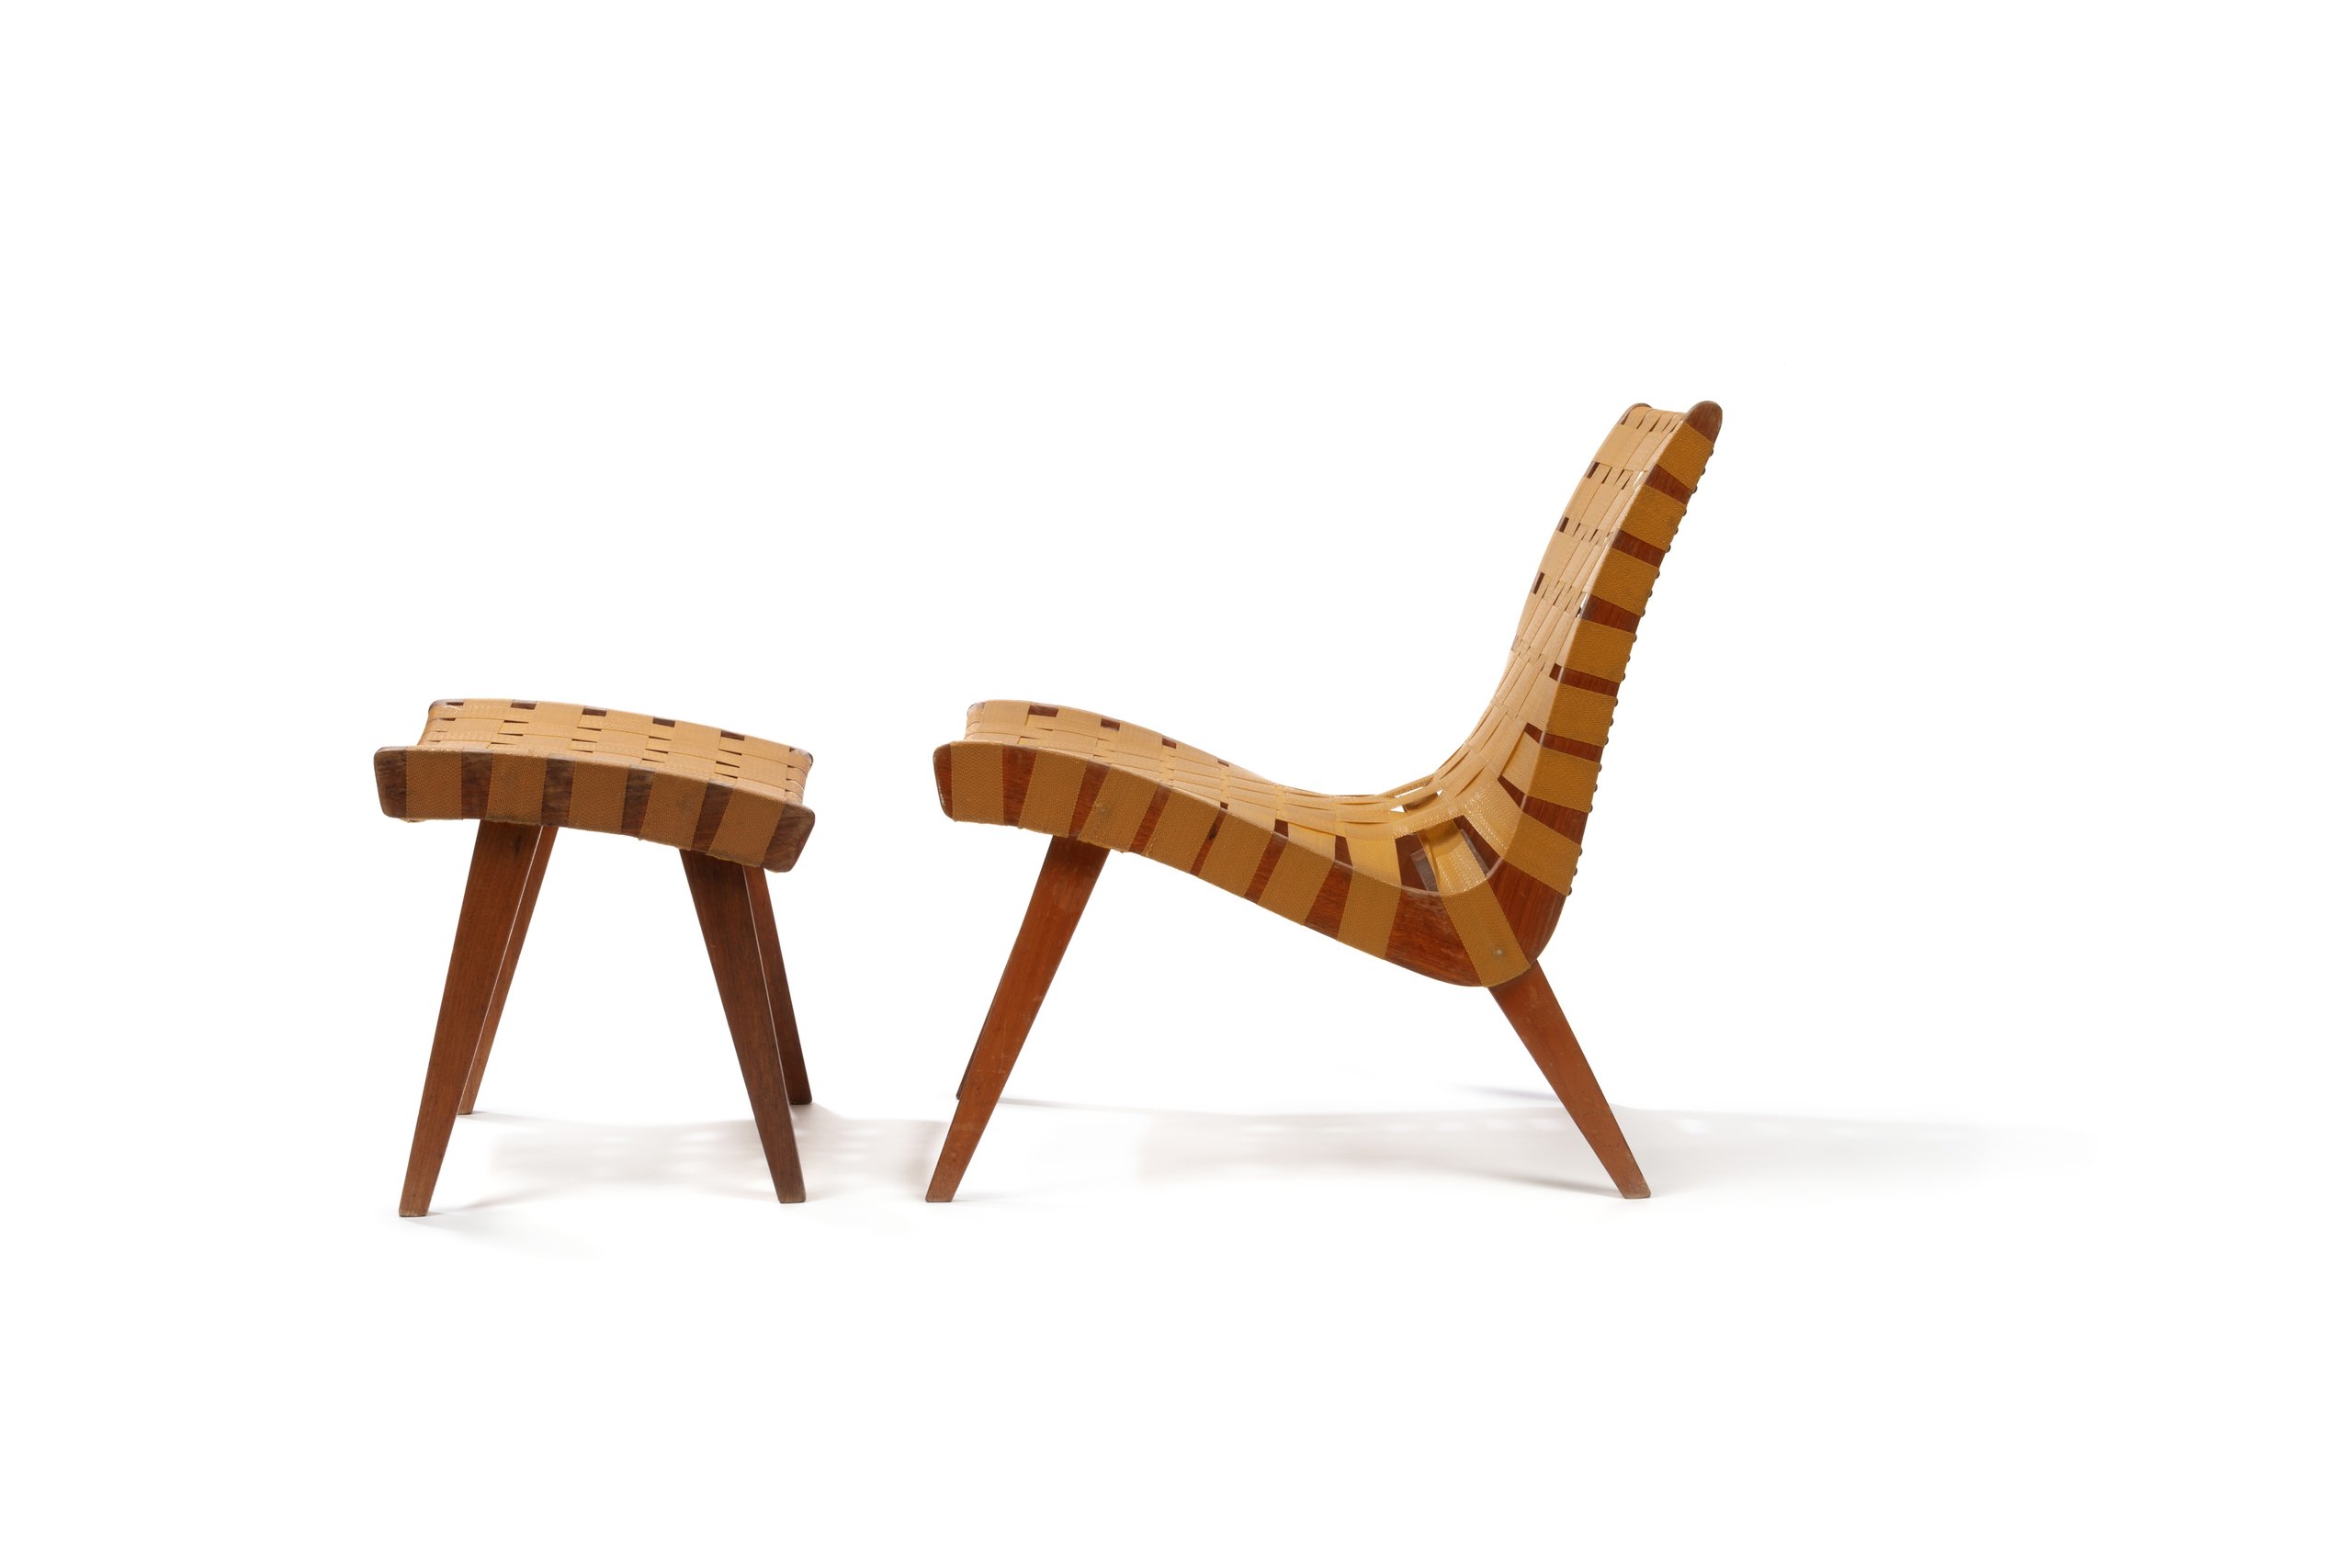 Chair and stool by Douglas Snelling